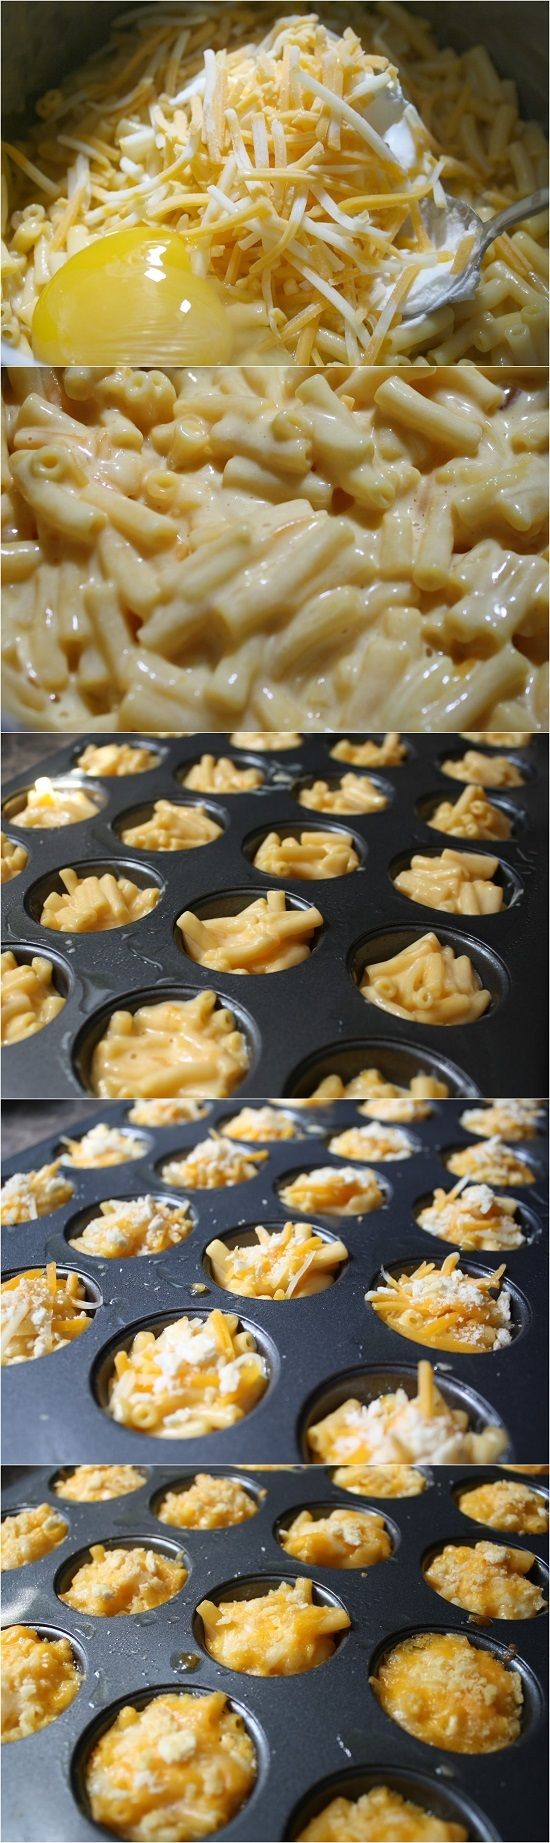 Easy Mac And Cheese Cups @Chelsea Rose Wilder I wonder it britches would eat the